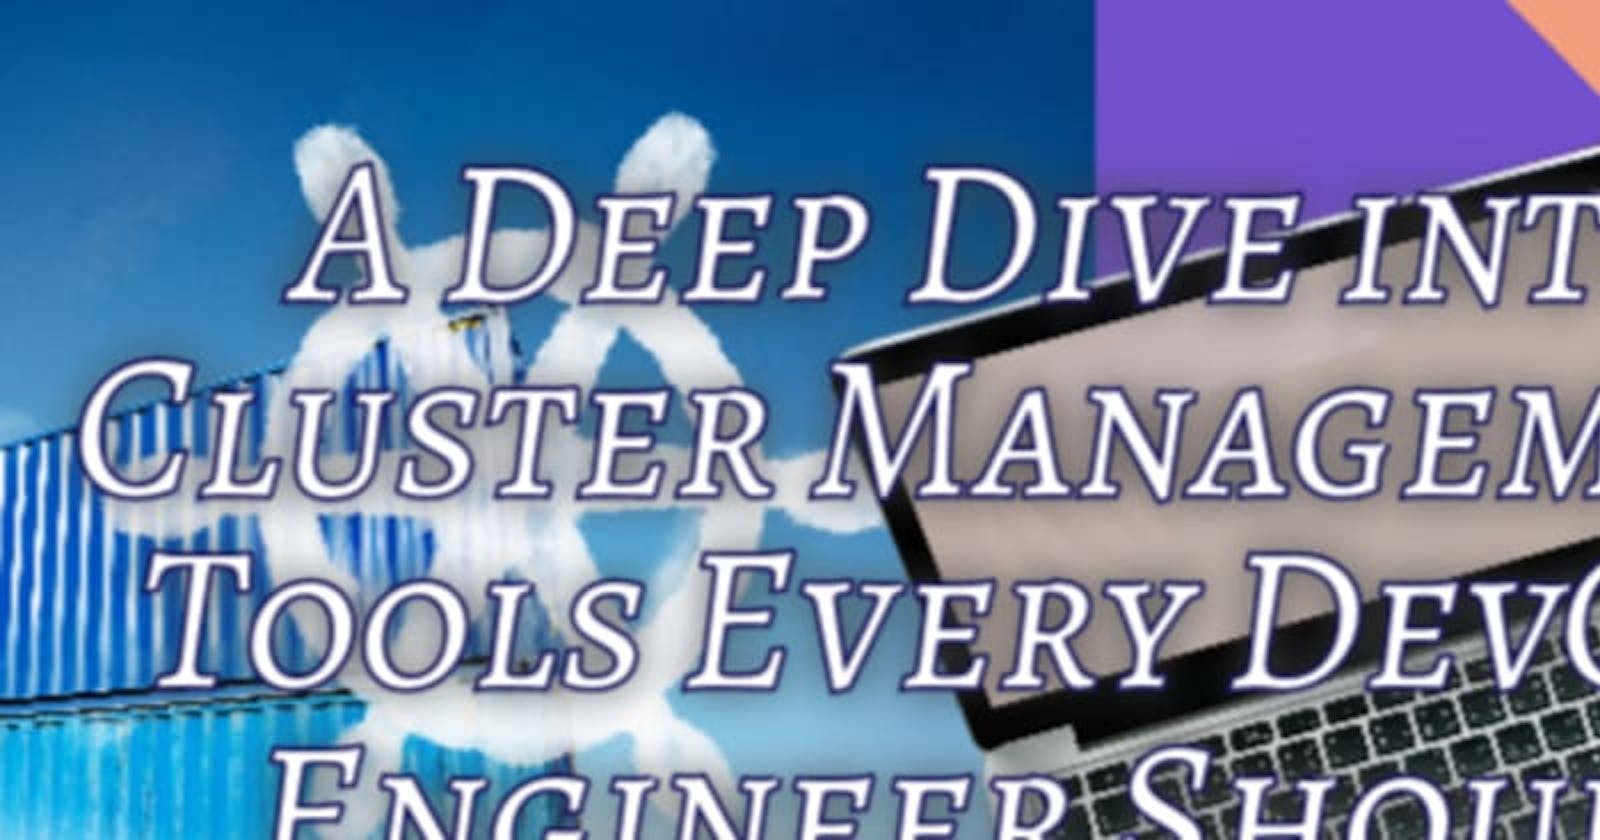 Mastering Kubernetes A Deep Dive into Cluster Management Tools Every DevOps Engineer Should Know